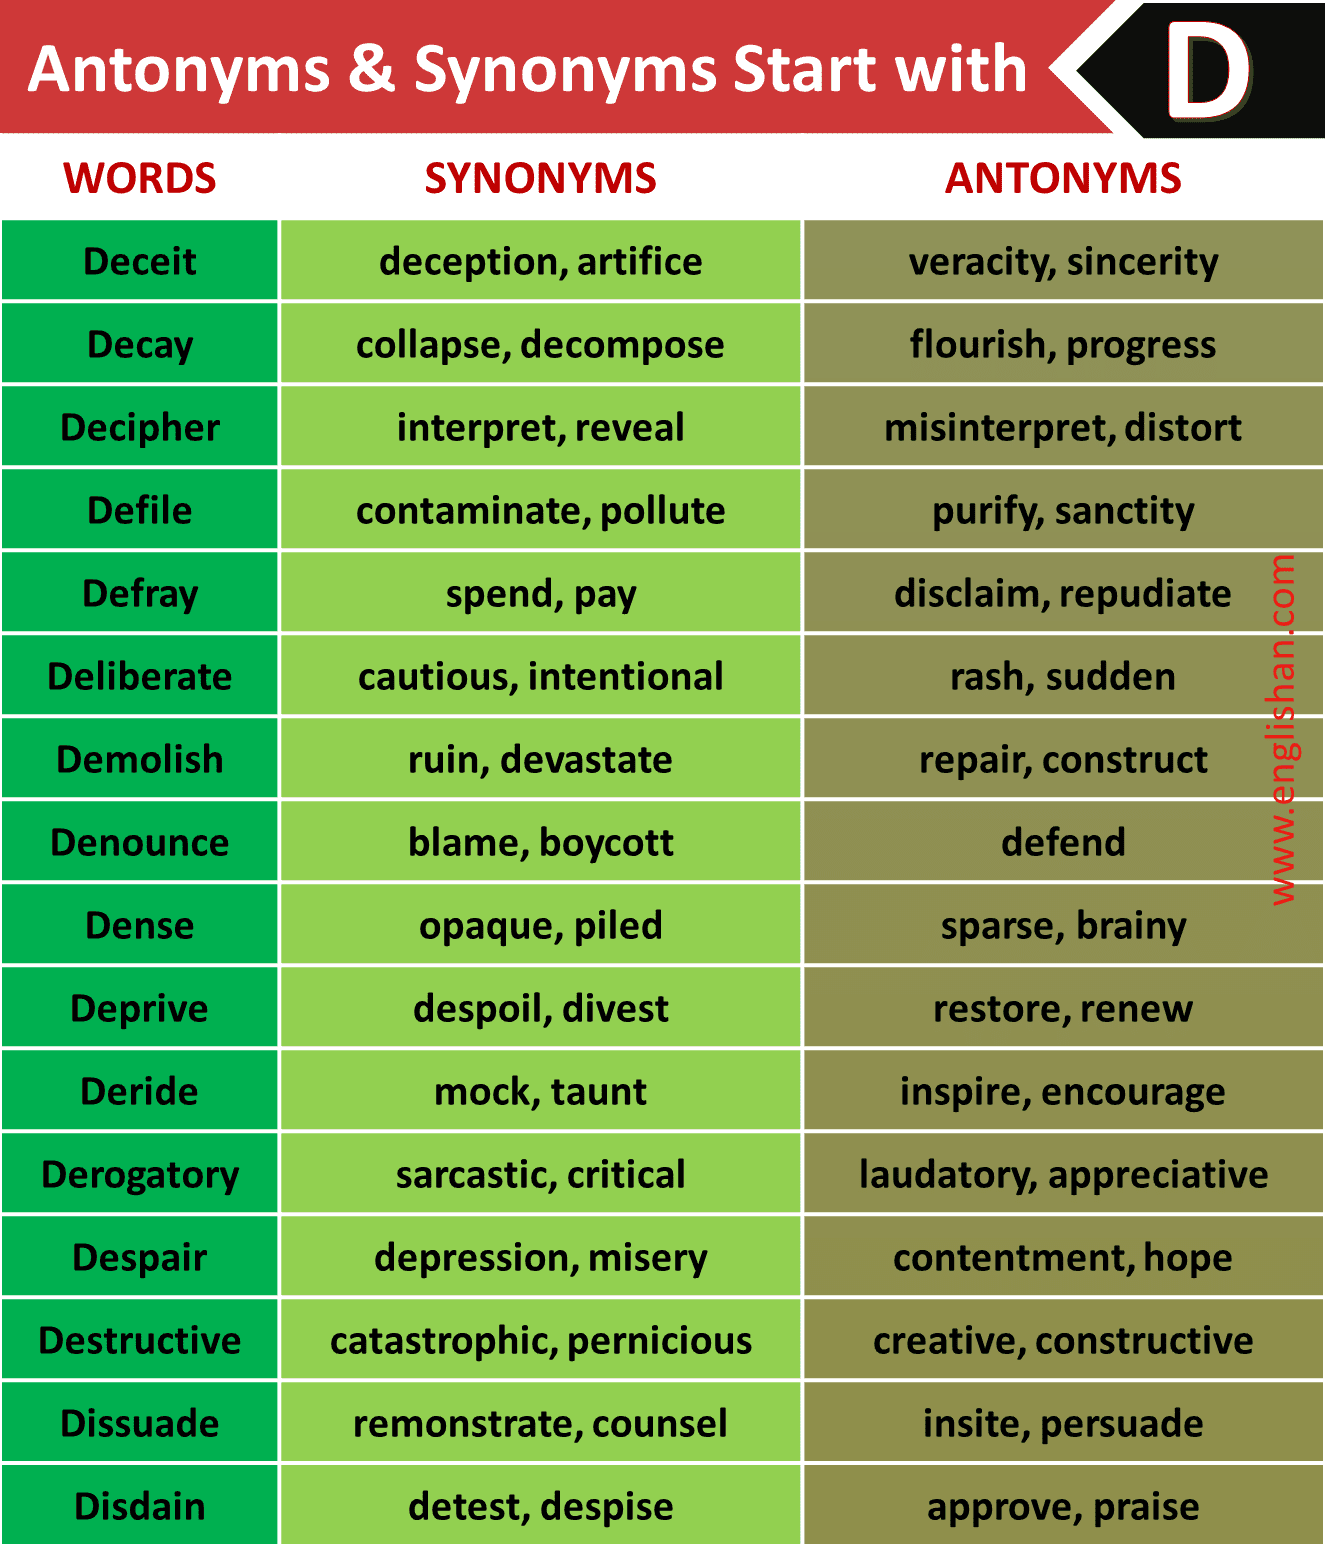 List of 1000 + Antonyms and Synonyms A to Z